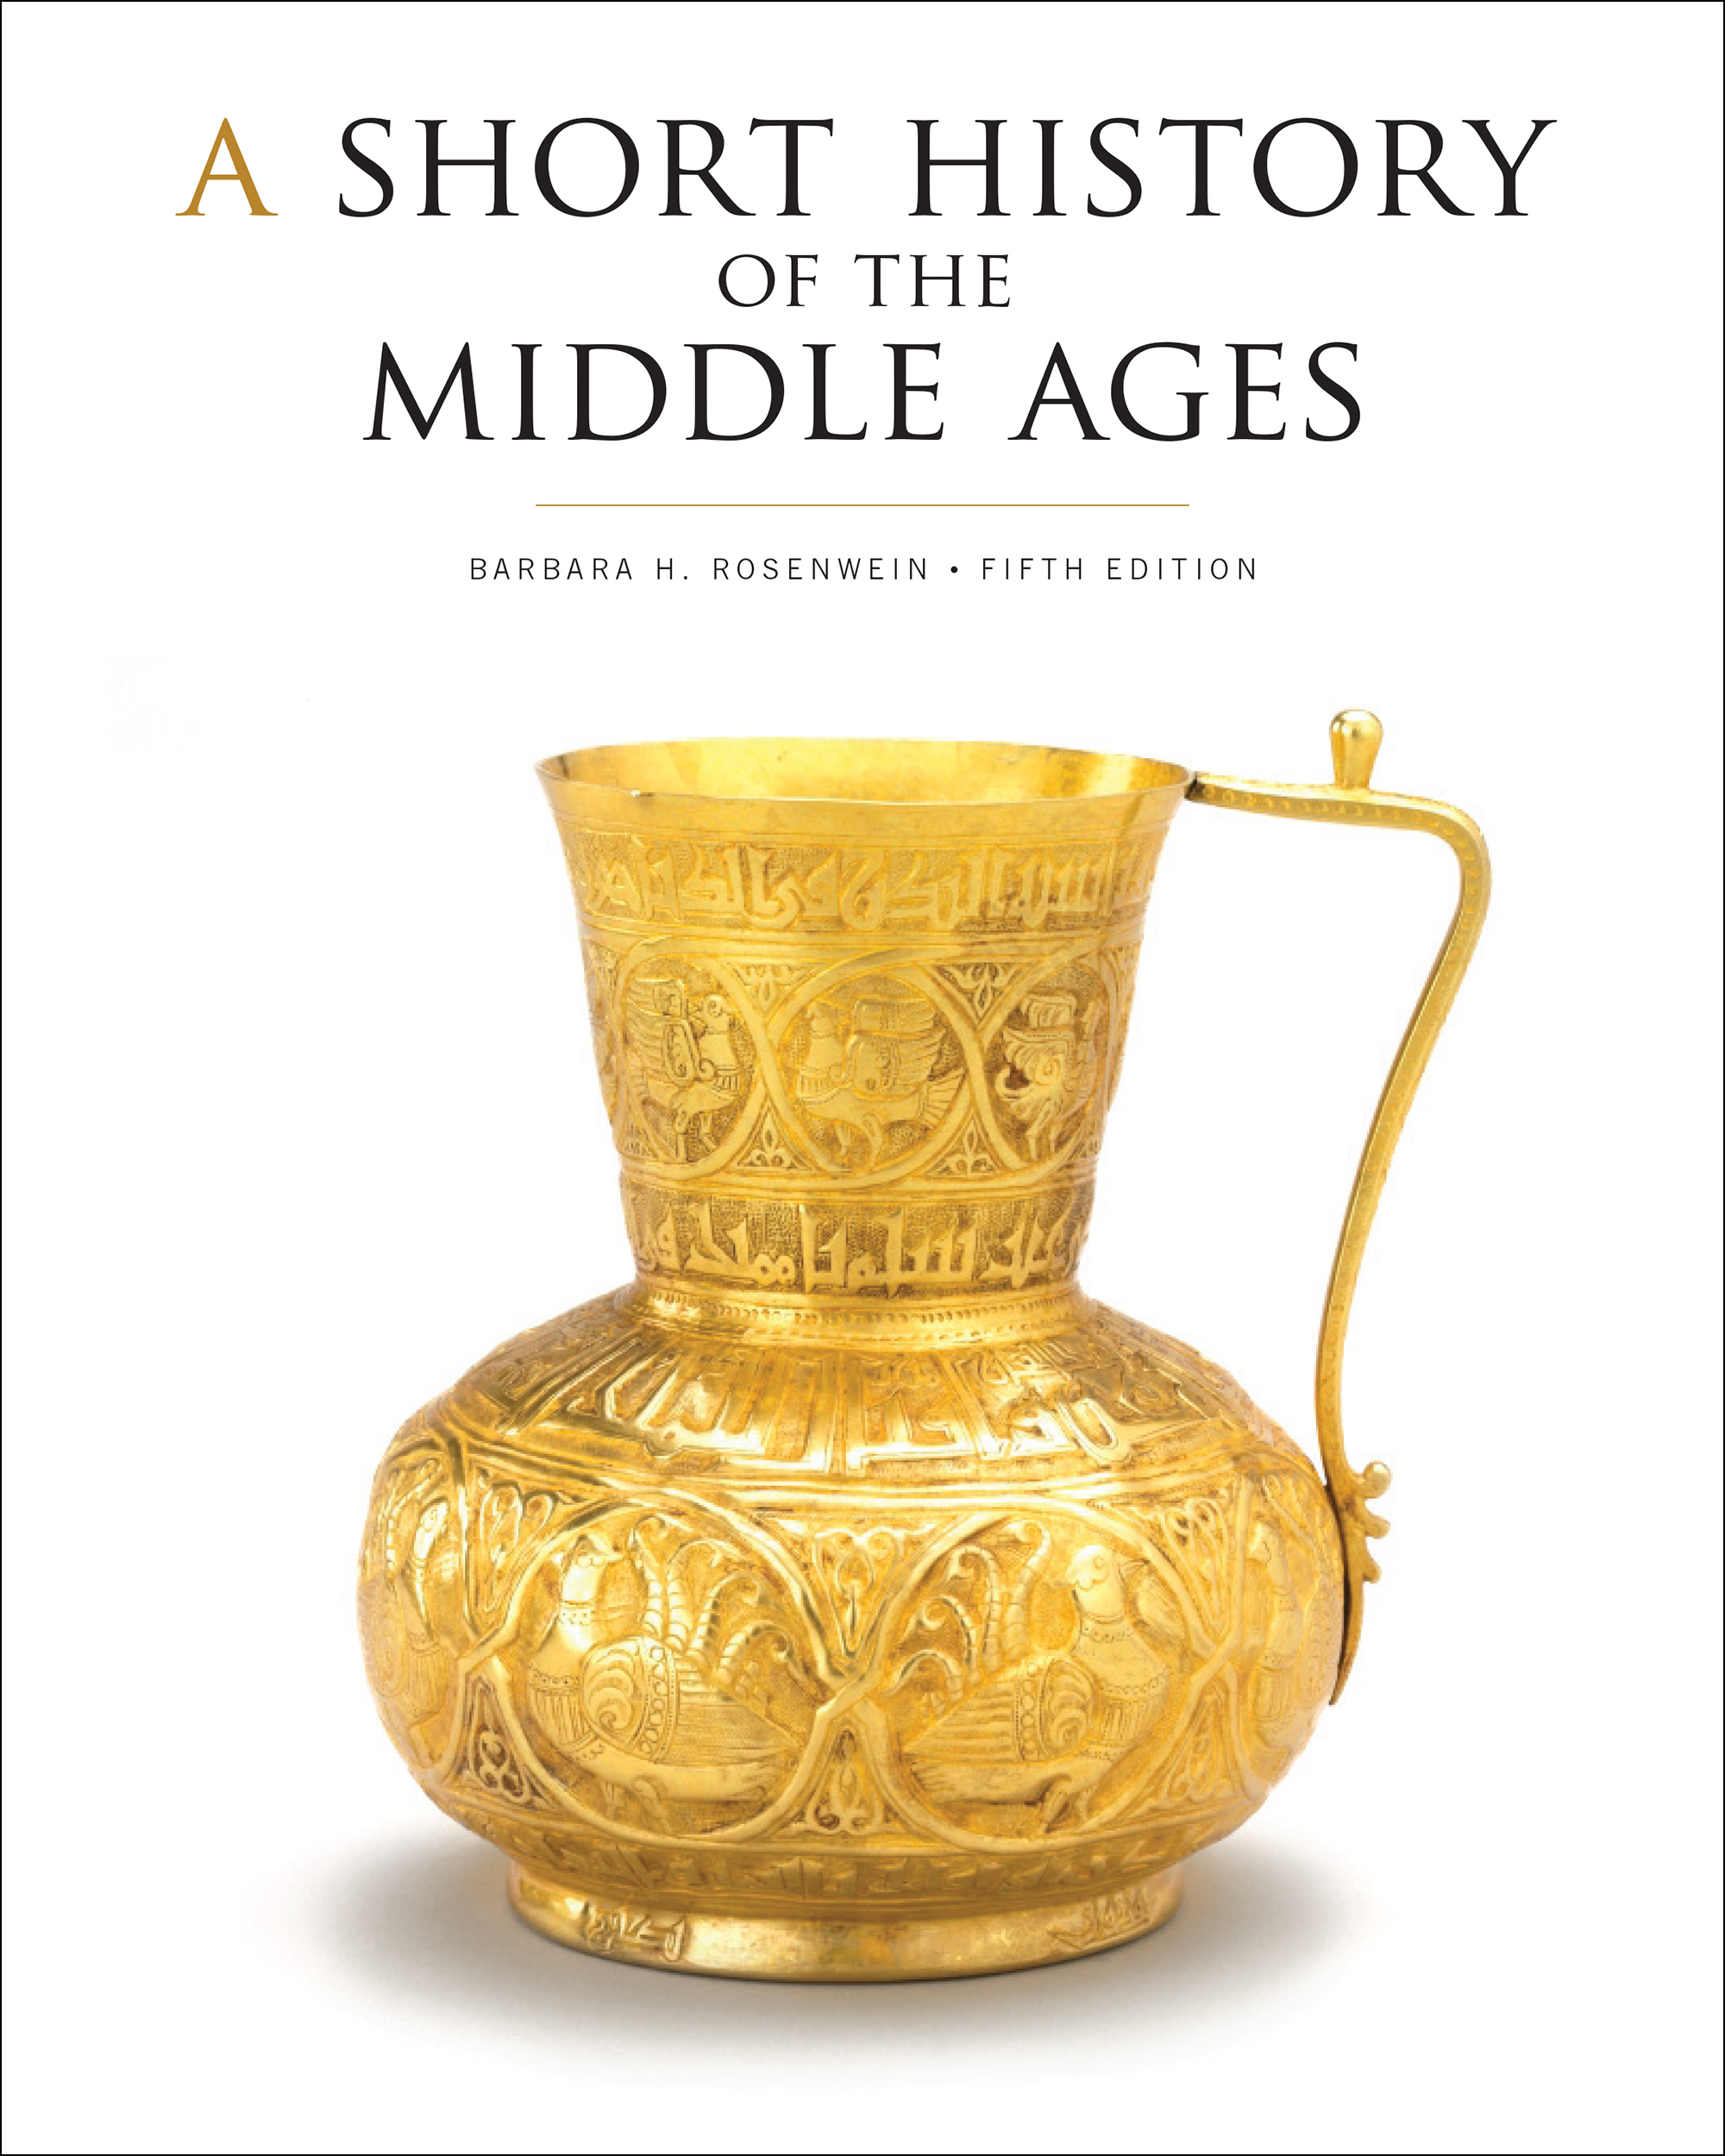 A Short History of the Middle Ages, Fifth Edition | Rosenwein, Barbara H.